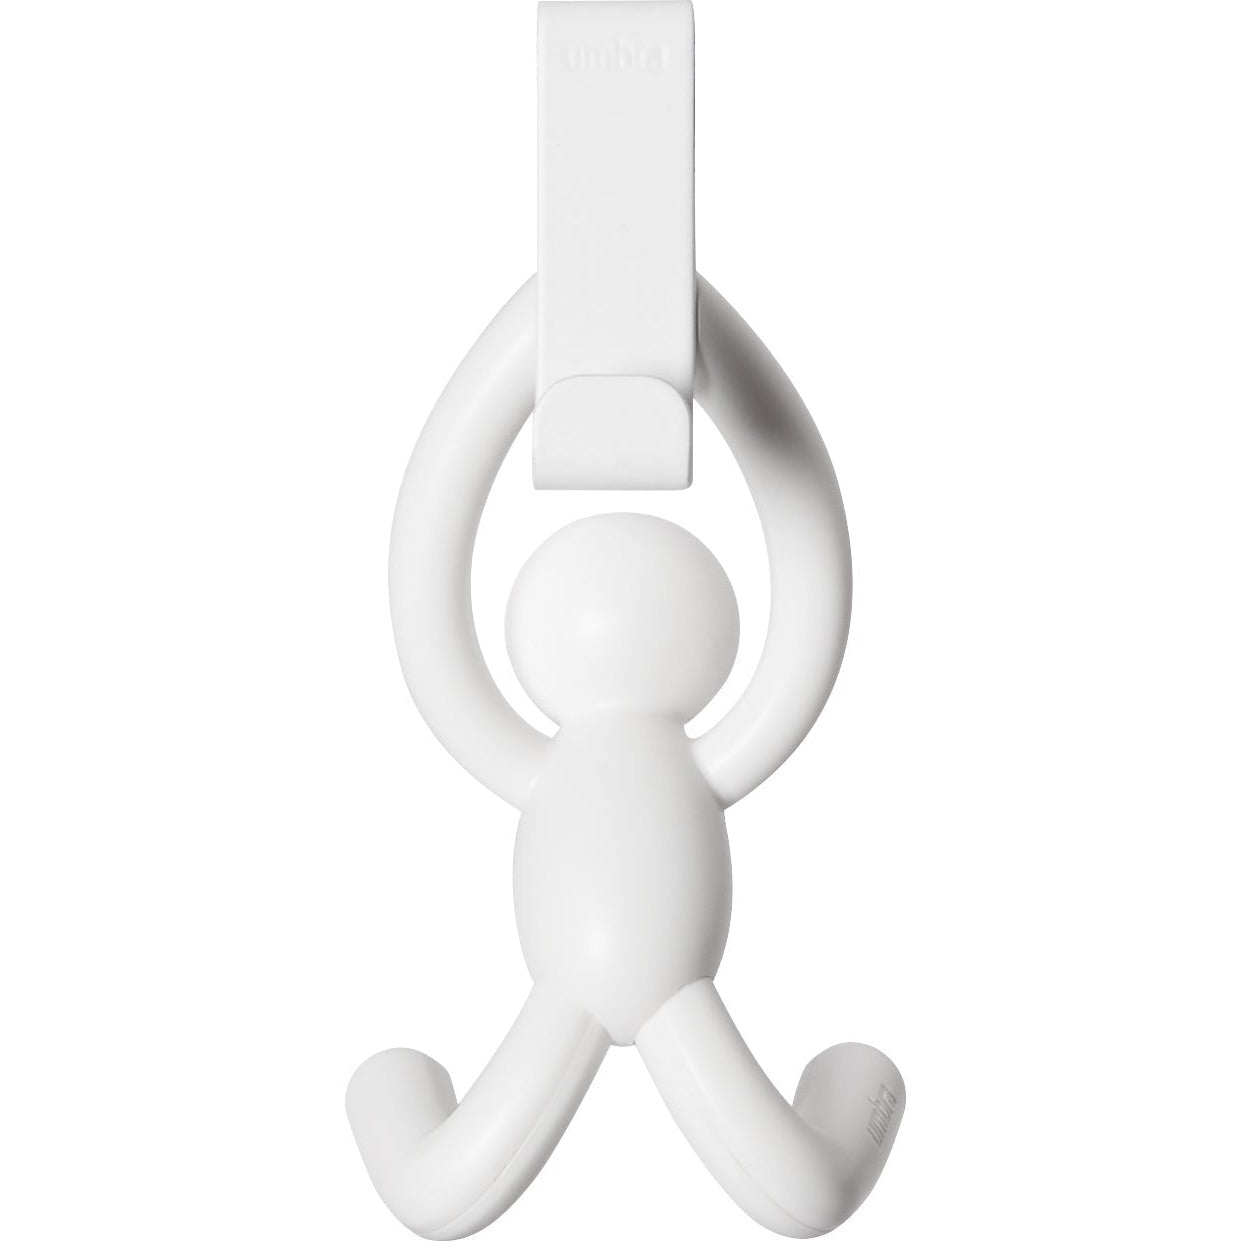 Buddy Over the Cabinet Hook (Set of 2)